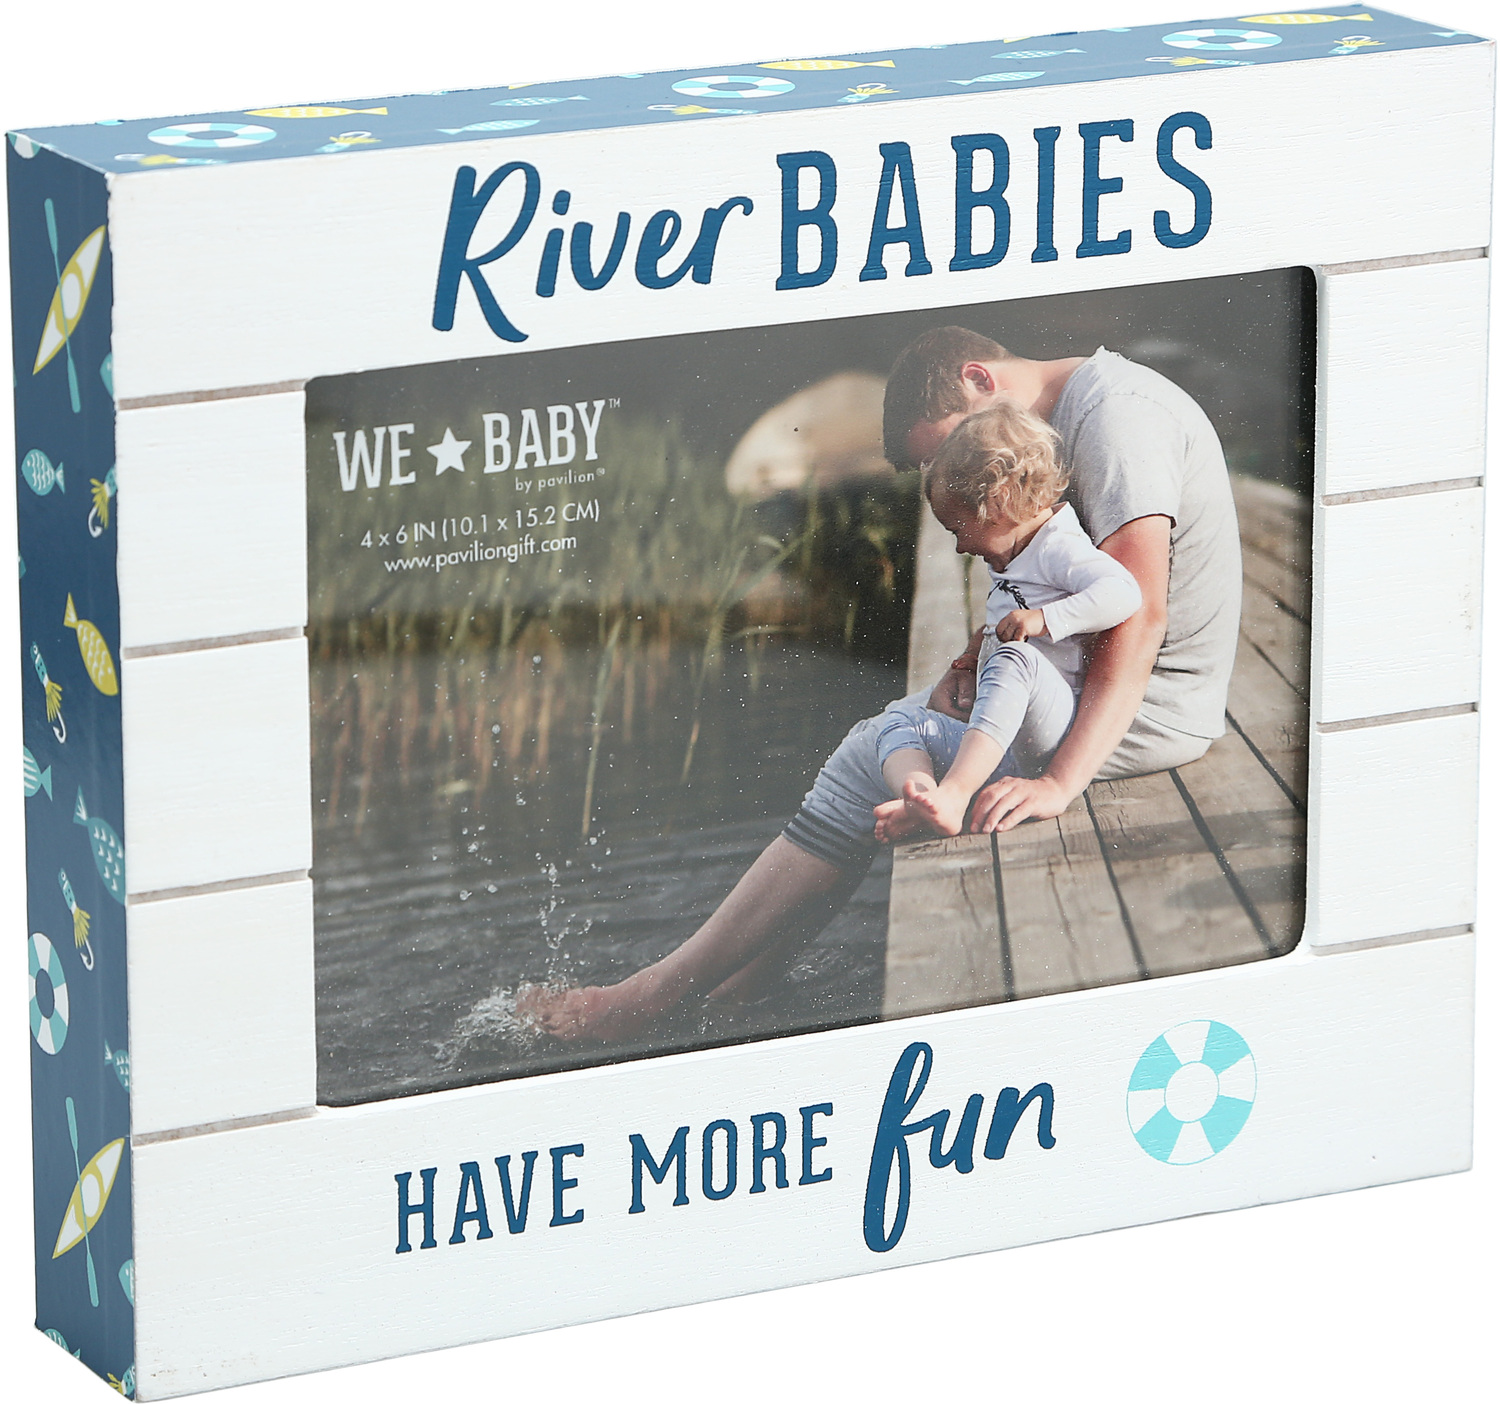 River Babies by We Baby - River Babies - 7.5" x 6" Frame (Holds 6" x 4" Photo)